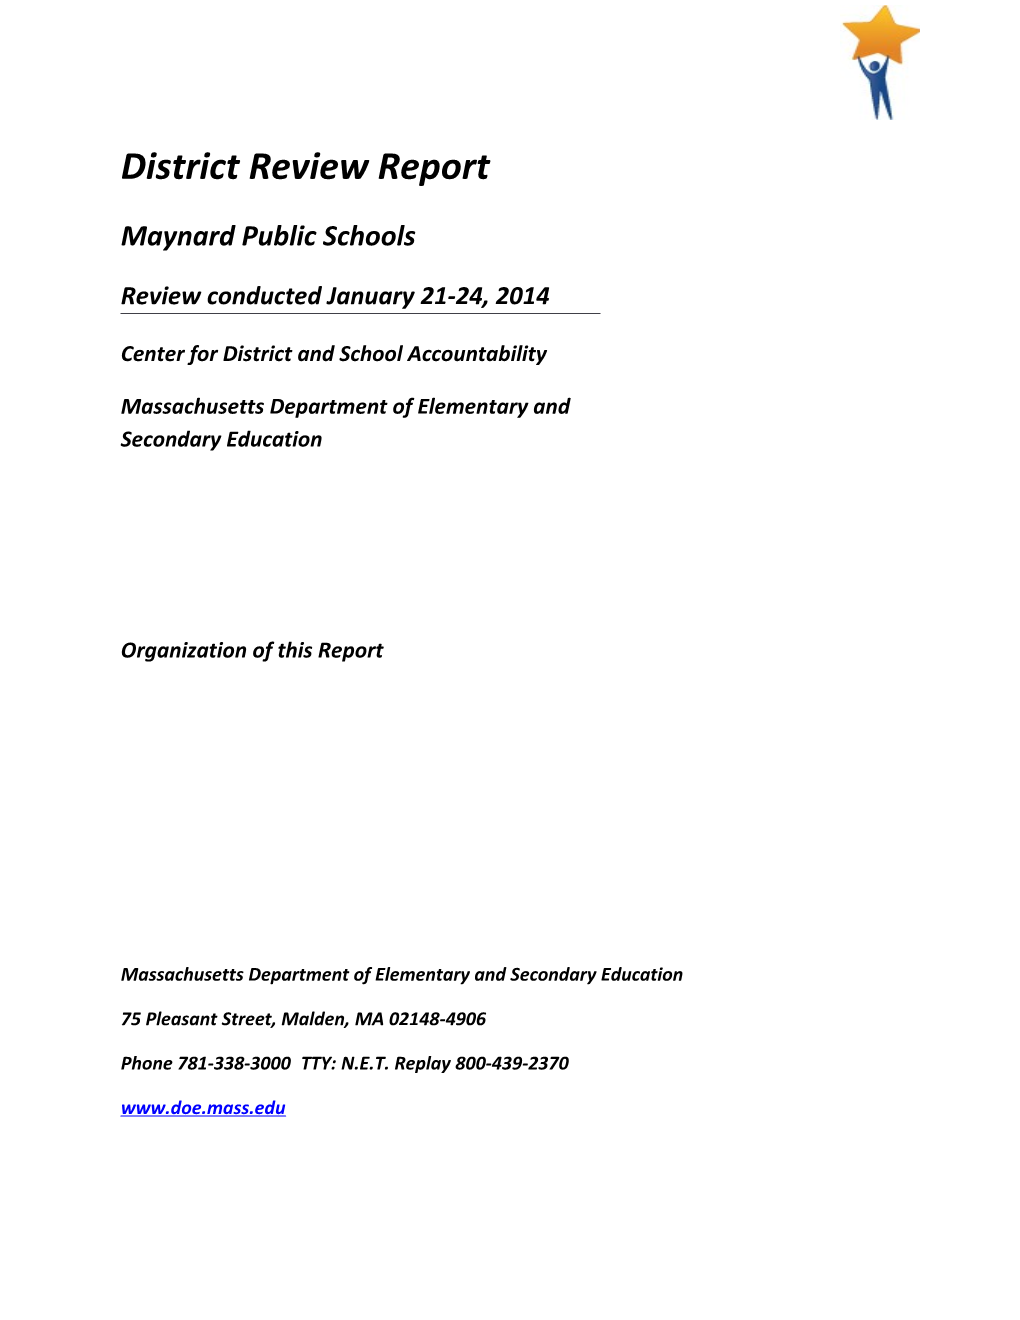 Maynard Public Schools - January 21-24, 2014 District Review Report